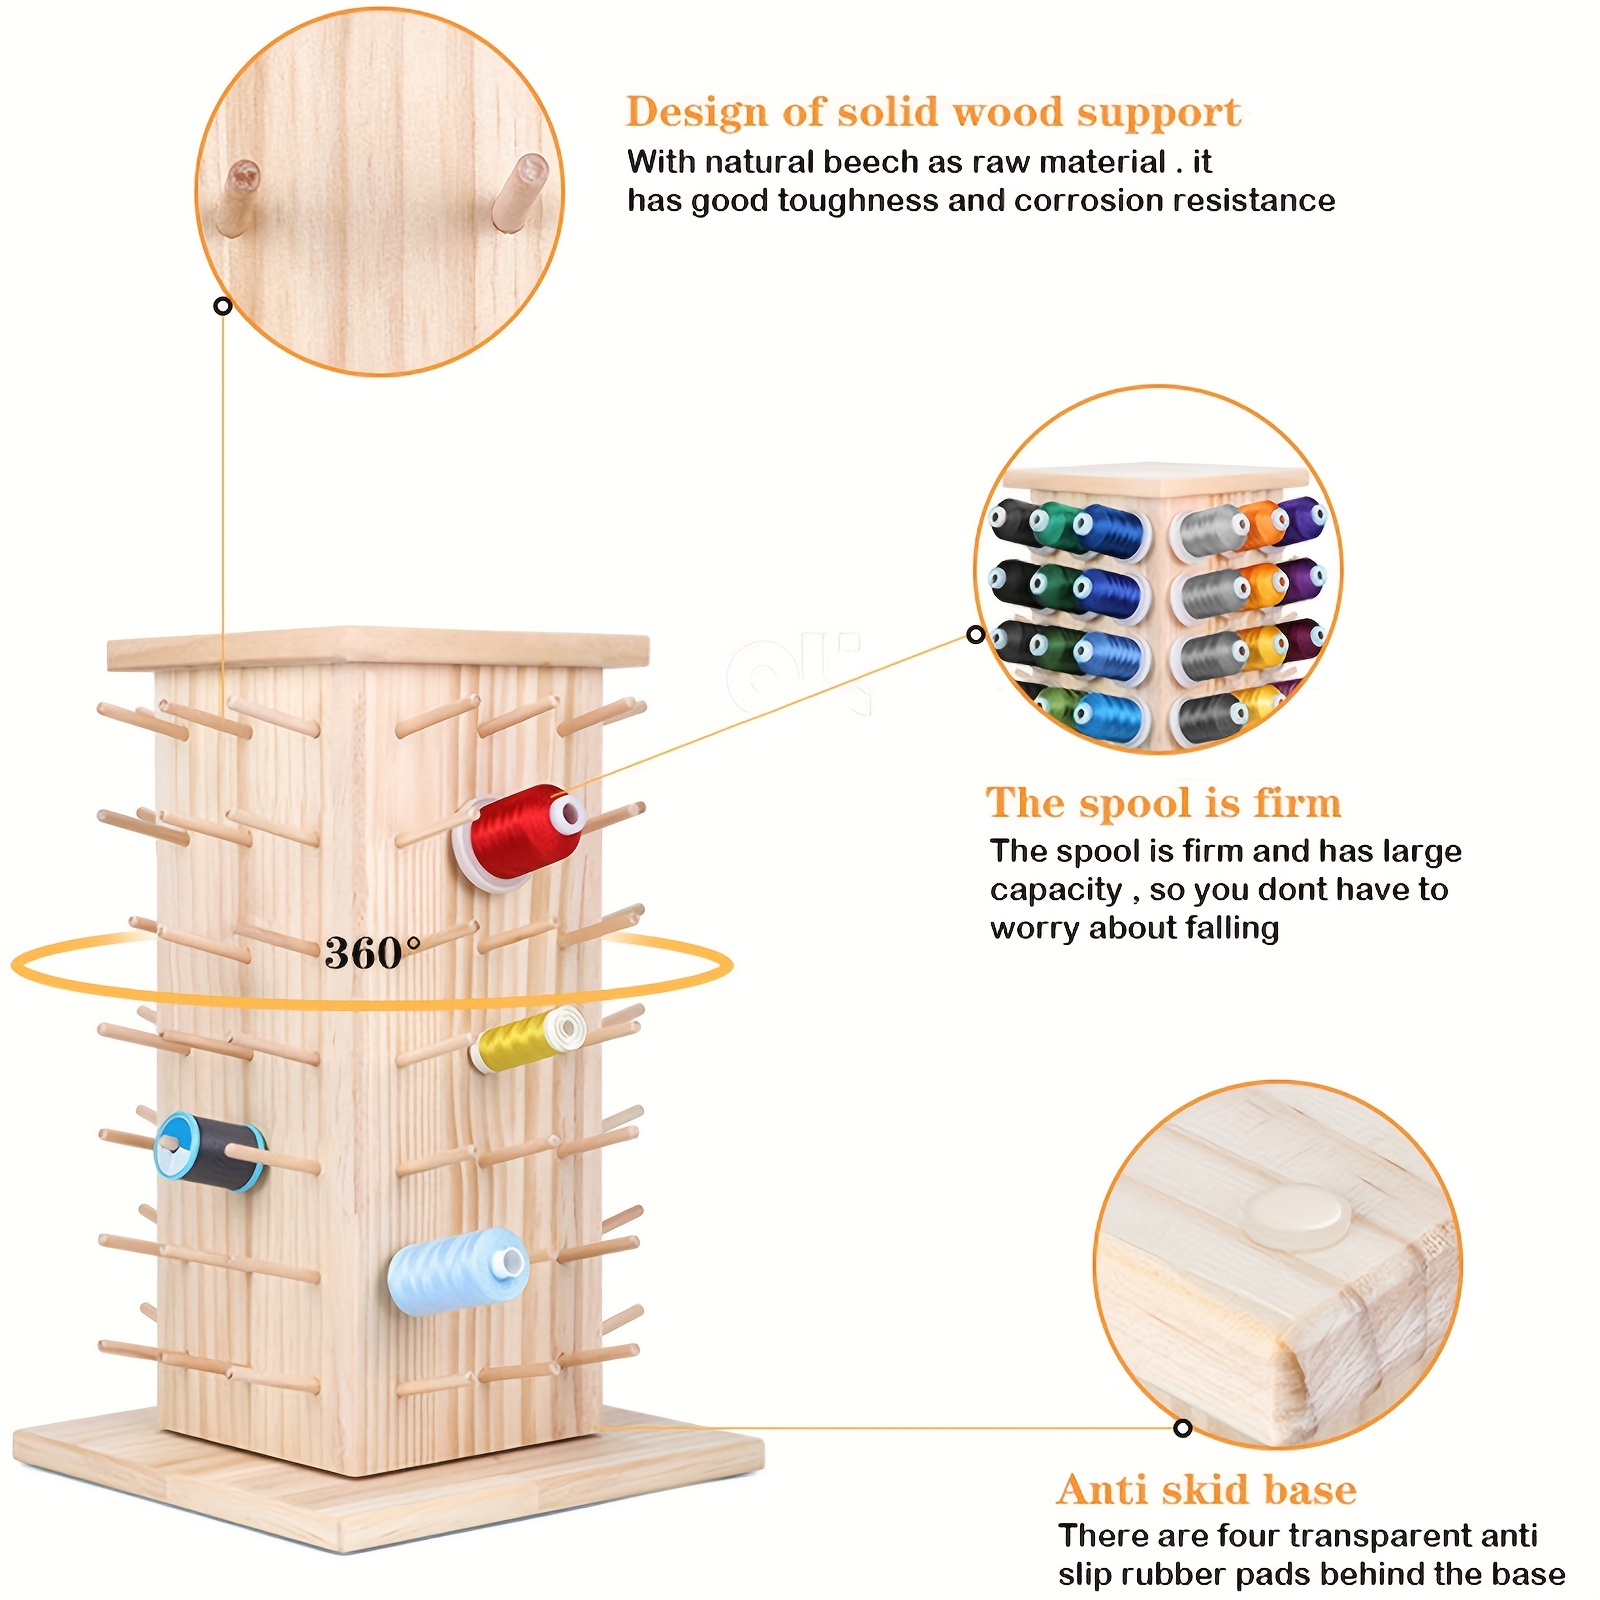 84 Spools (diy To Be 93 Spools) 360 Fully Rotating Wooden Thread  Rack/thread Holder Organizer For Sewing, Quilting, Embroidery,  Hair-braiding And Jewe